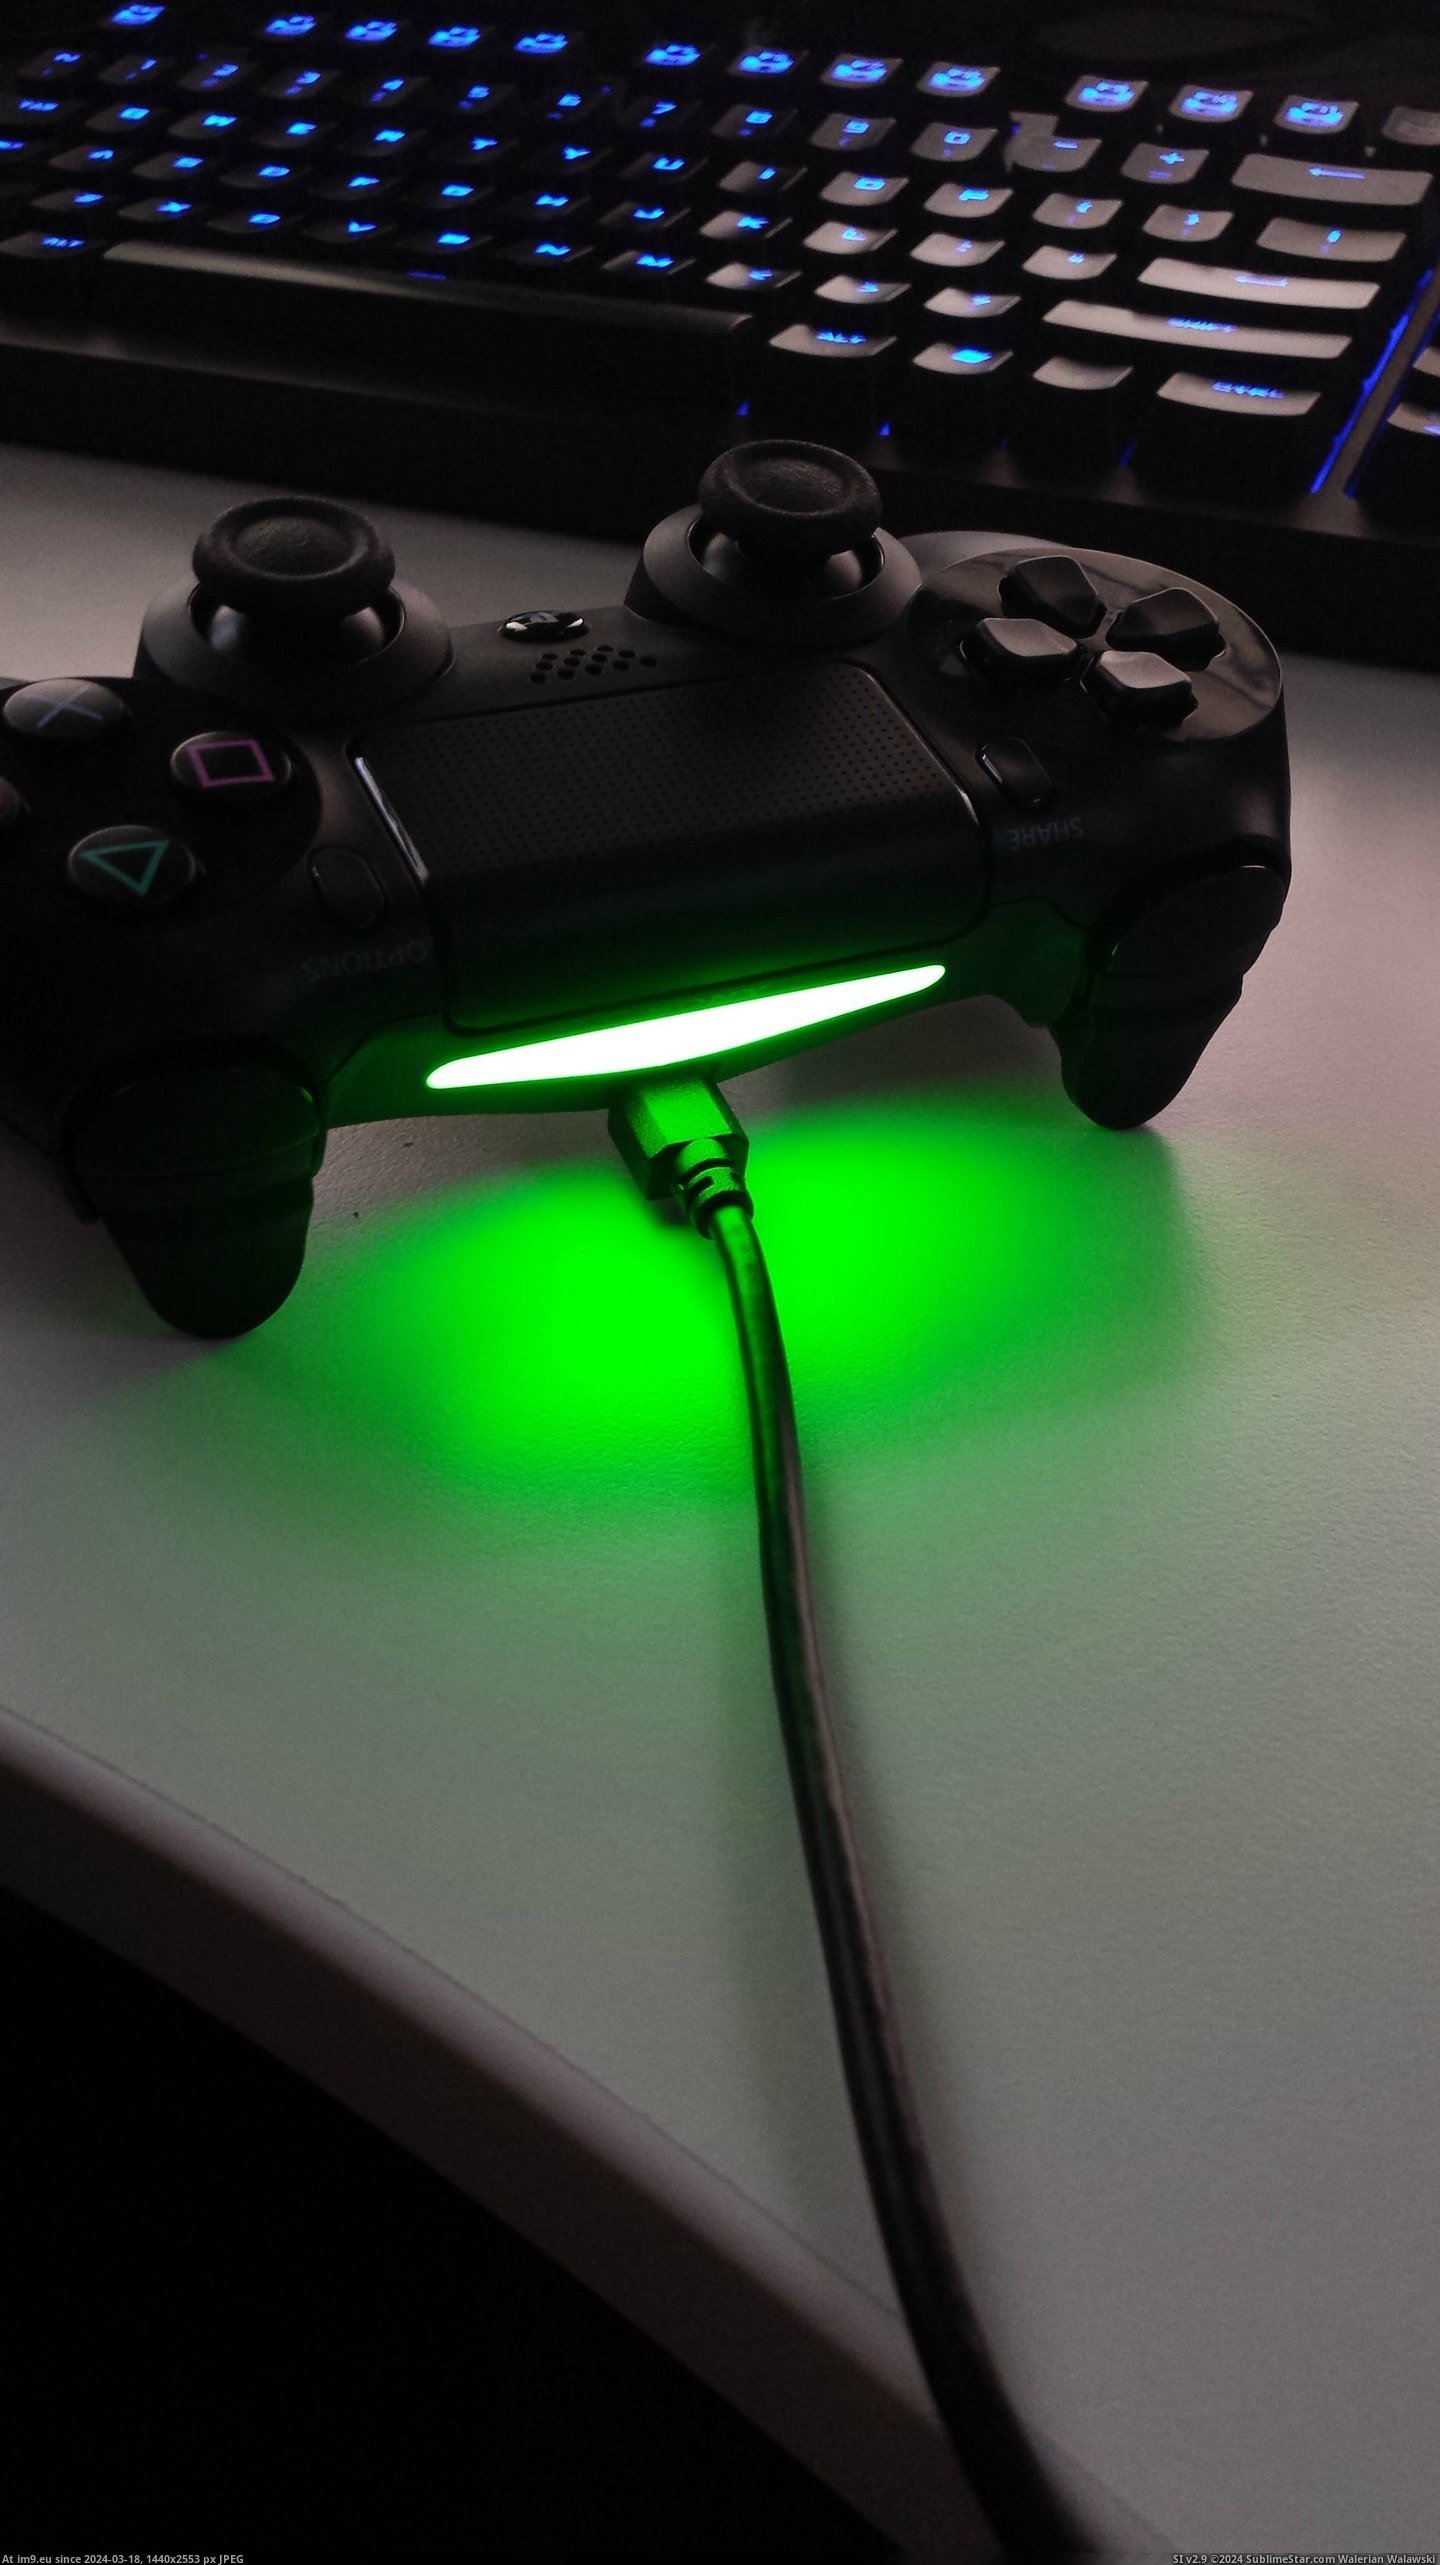 #Gaming #Change #Ps4 #Lightbar #Color #Controller [Gaming] If you use the PS4 controller on the PC, you can change the color of the lightbar. 5 Pic. (Image of album My r/GAMING favs))